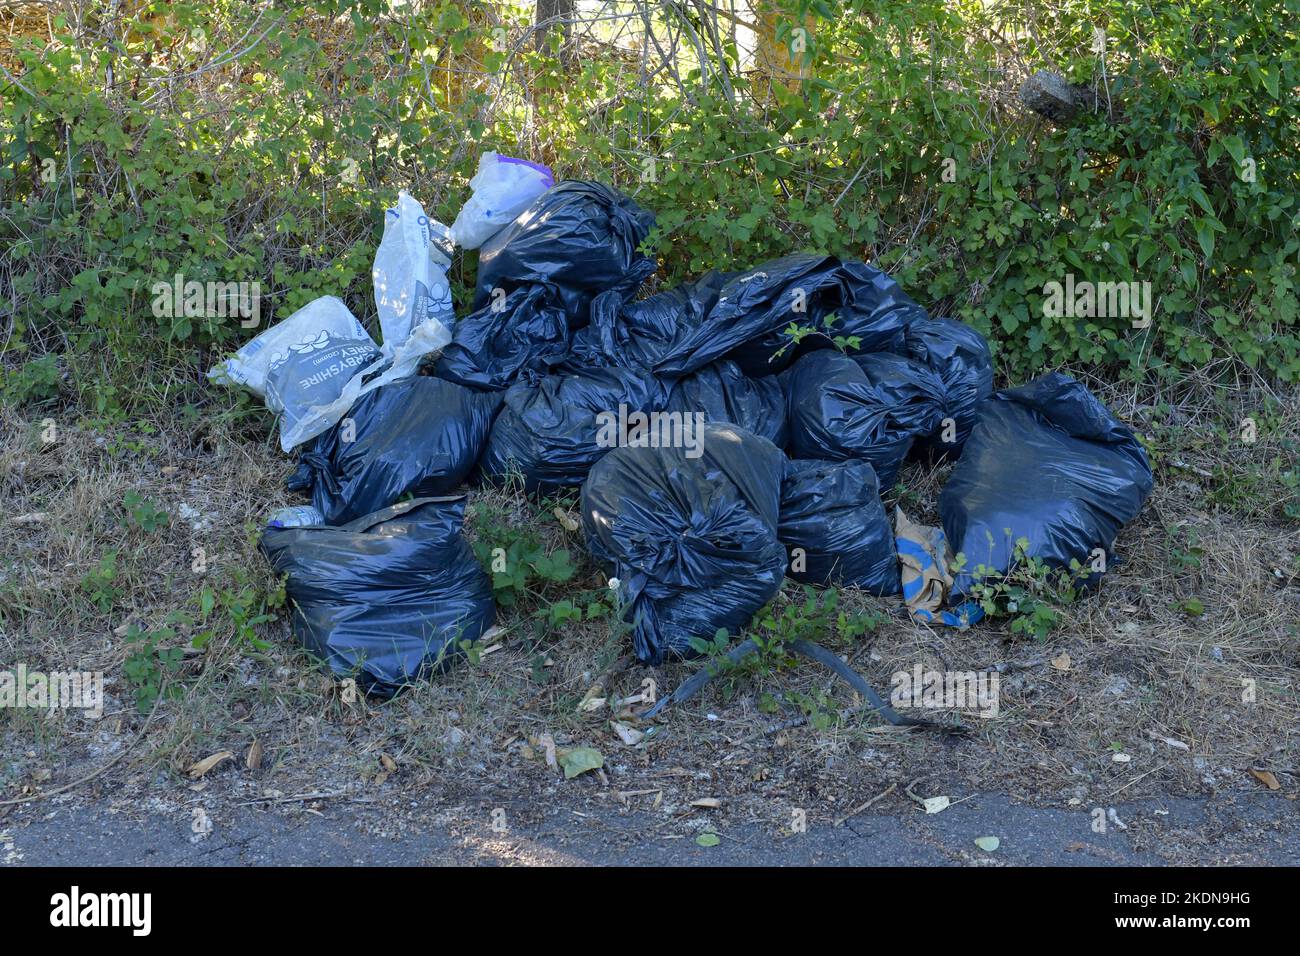 black bags filled with rubbish dumped by the side of a rural road, England, UK Stock Photo